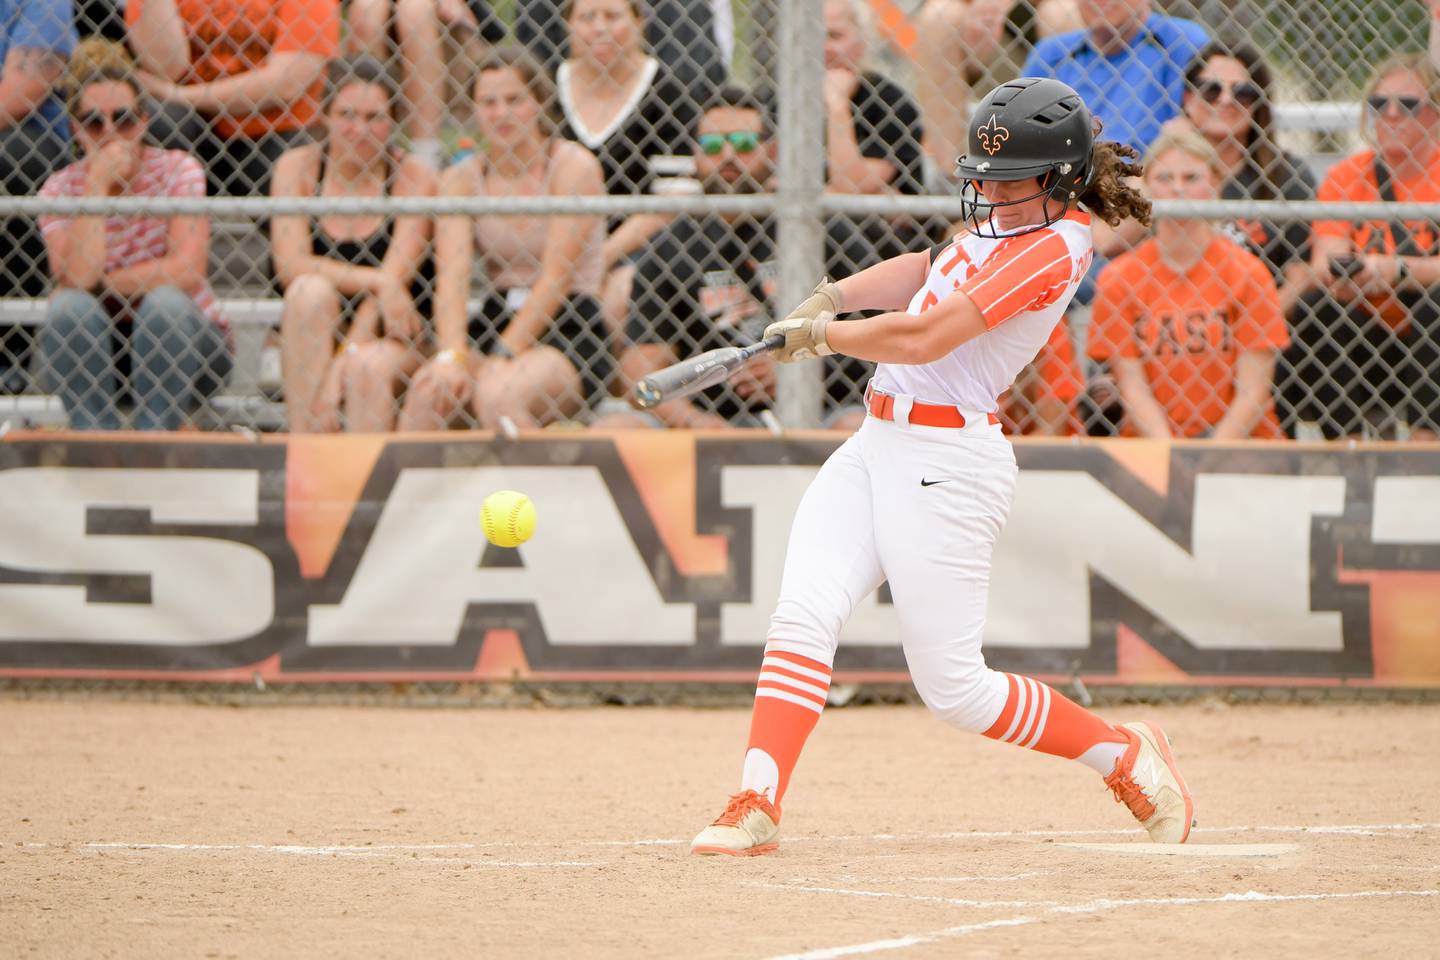 St. Charles East's Nikki Johnston bats against Glenbard North during the Class 4A St. Charles East Sectional semifinal on Tuesday, May 31, 2022.